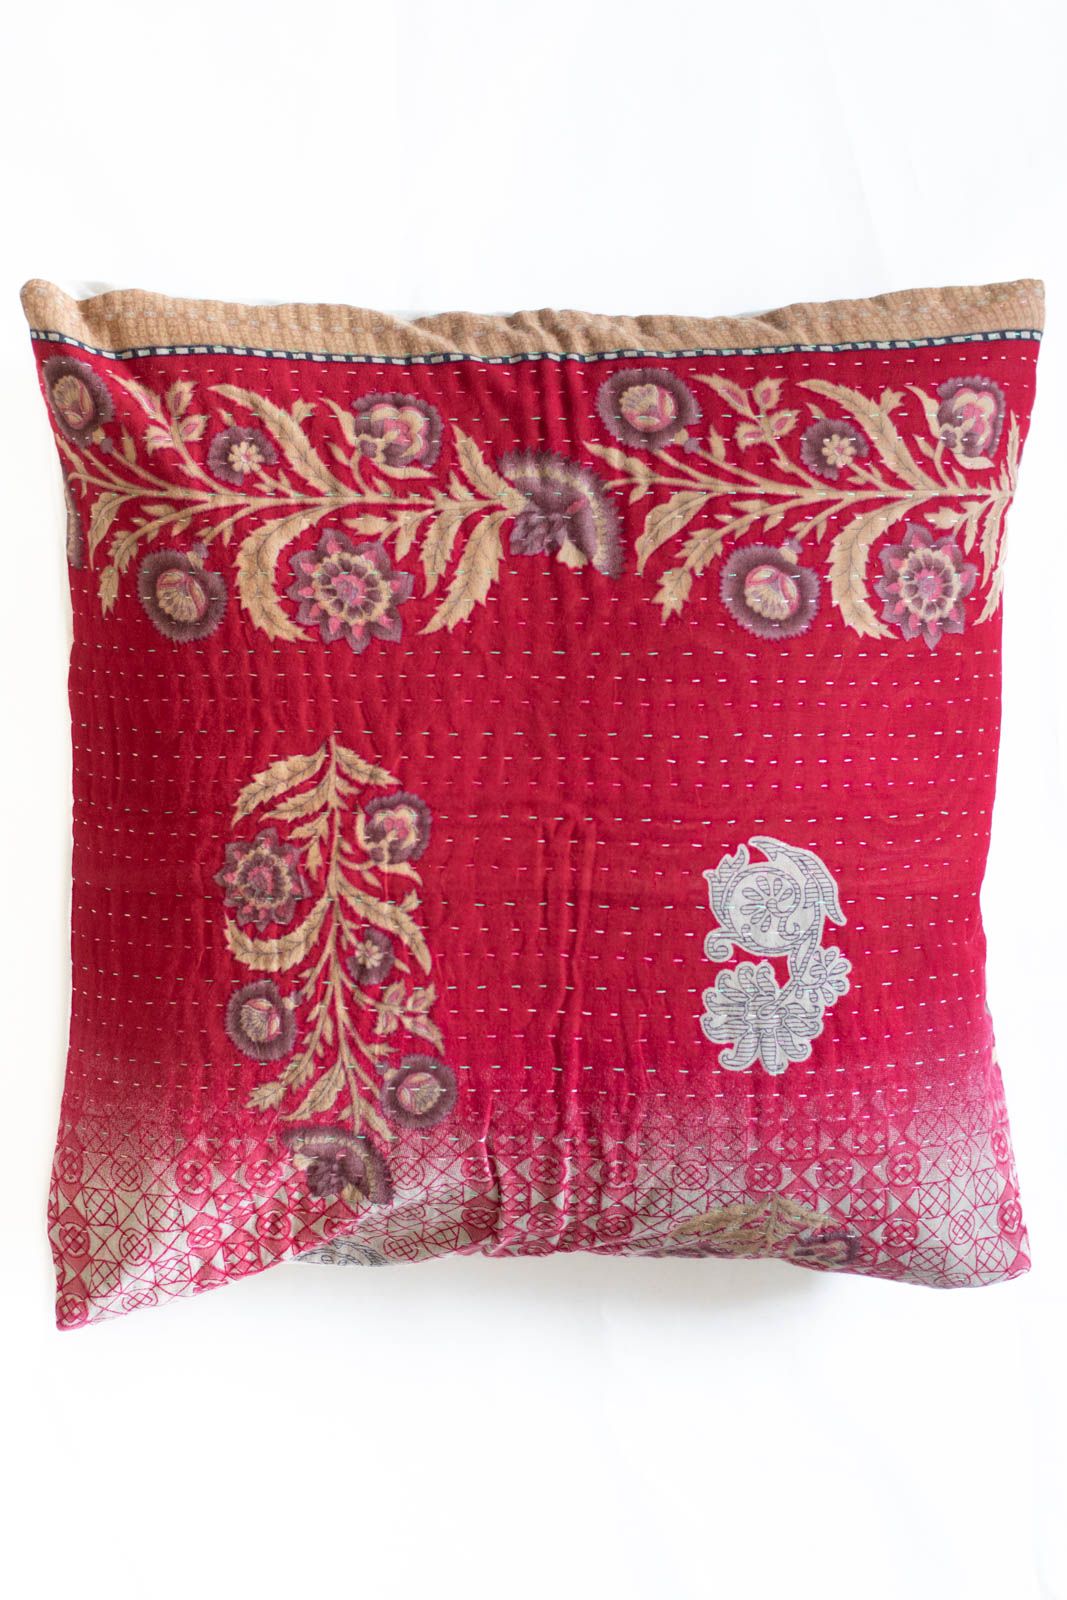 Dignity no. 3 Kantha Pillow Cover